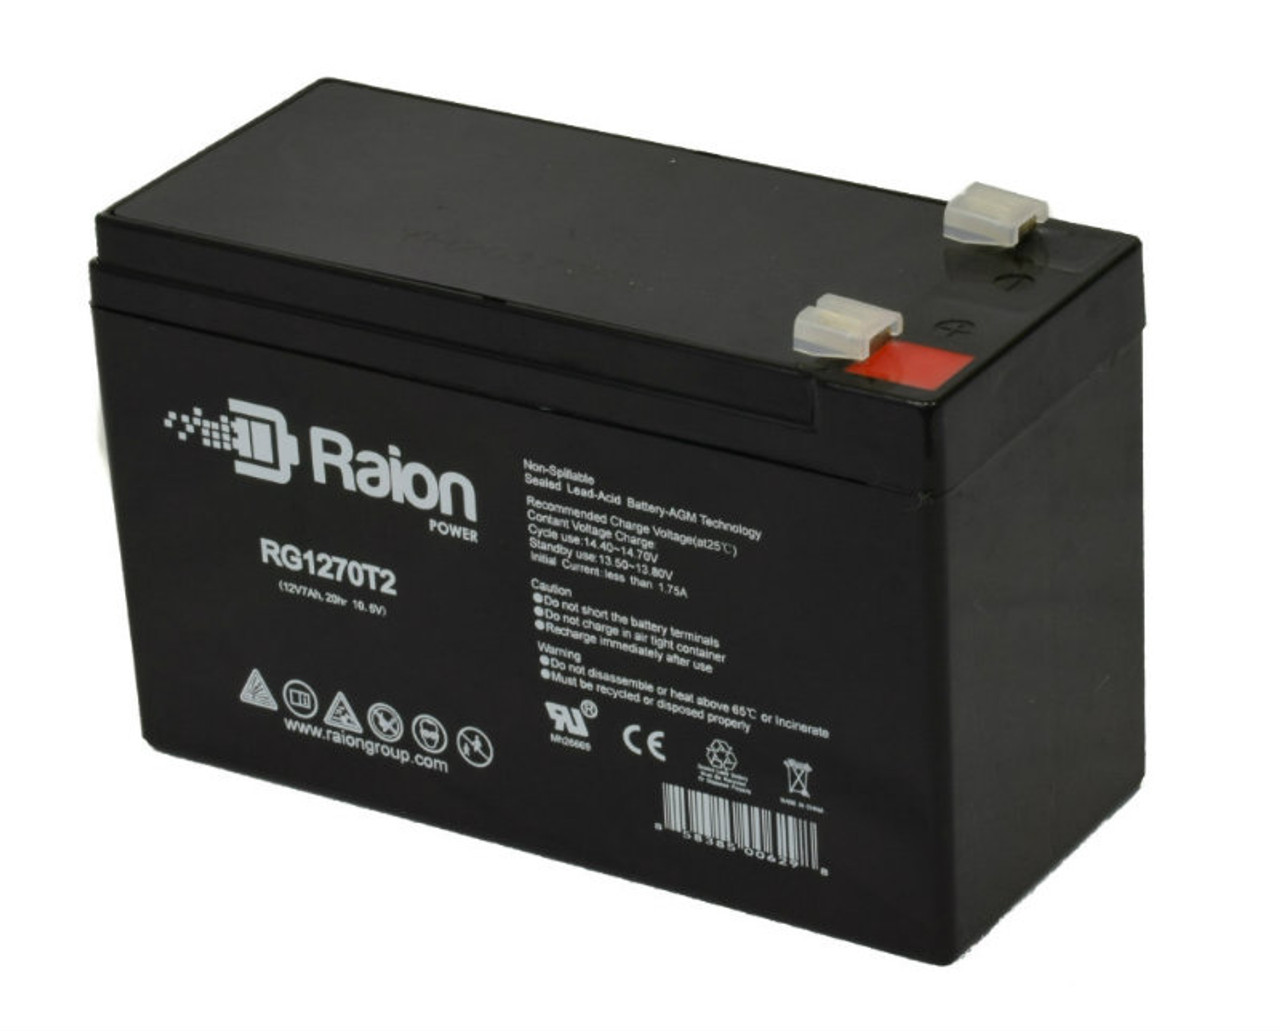 Raion Power Replacement 12V 7Ah RG1270T1 Fire Alarm Battery for Altronix SMP10C12X